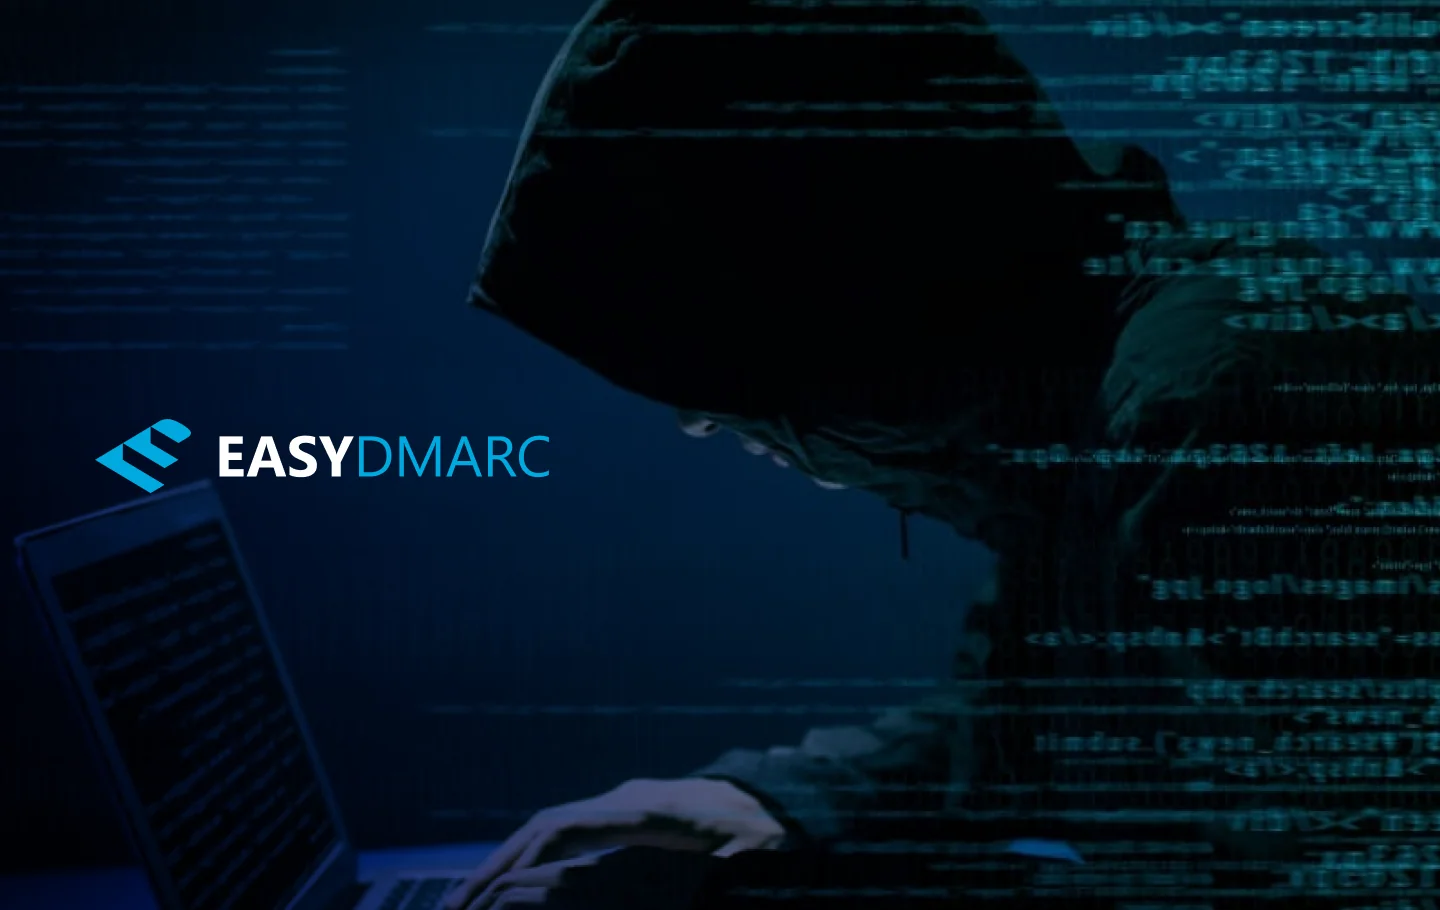 A person with a black hoodie on typing on a laptop, picture covered with the EasyDMARC logo